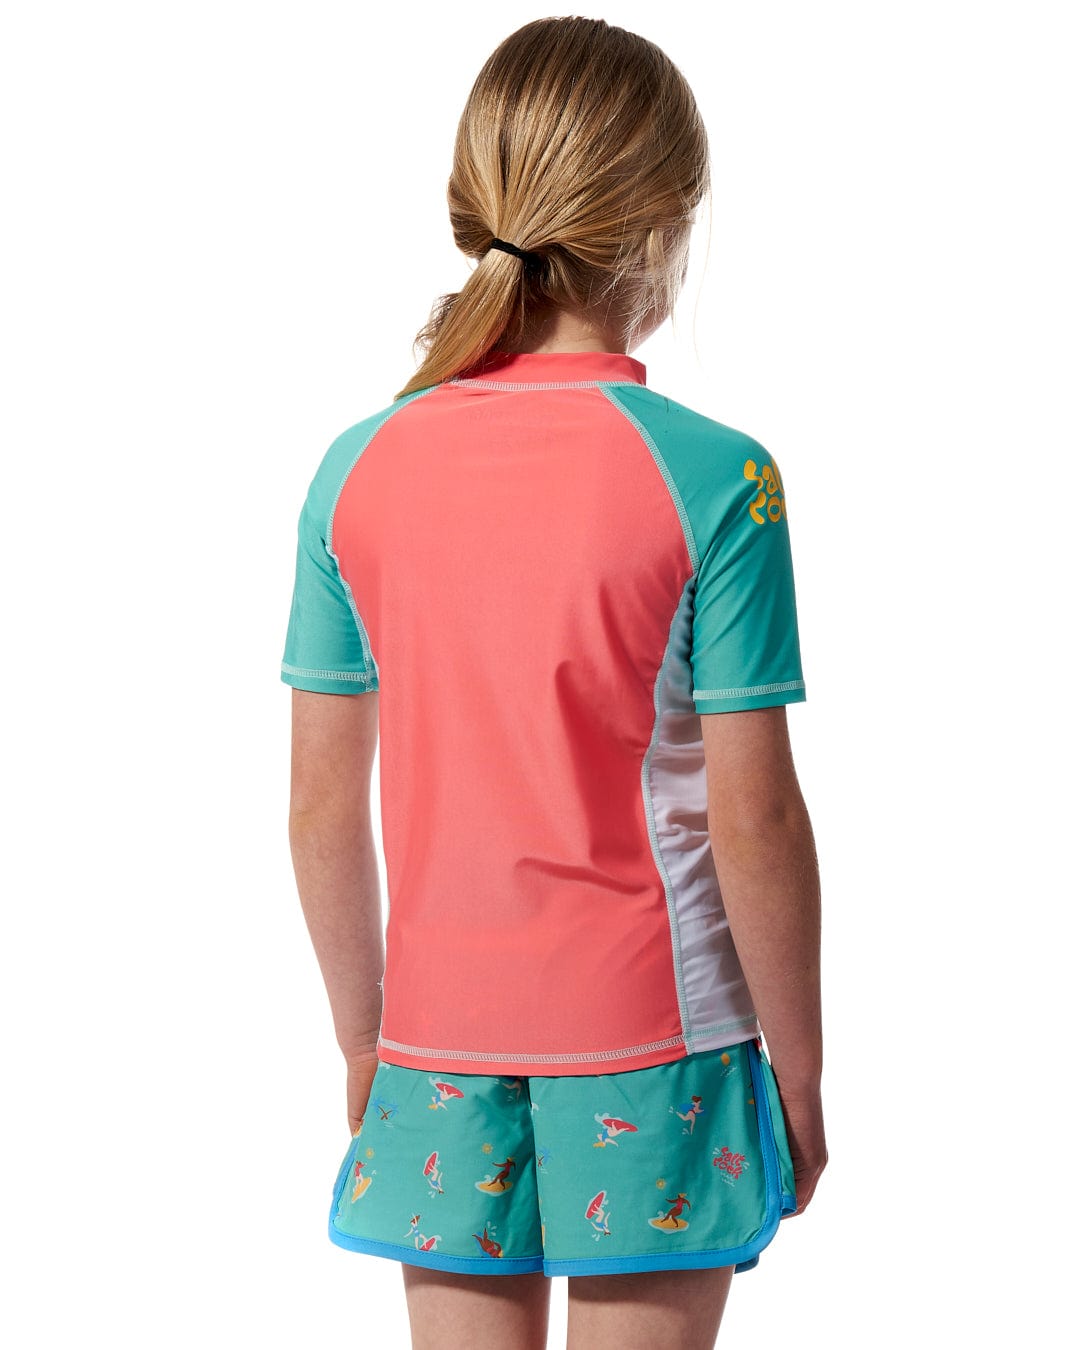 The back view of a girl wearing a Surf Sister - Kids Short Sleeve Rashvest in Coral/Turquoise, made by Saltrock.